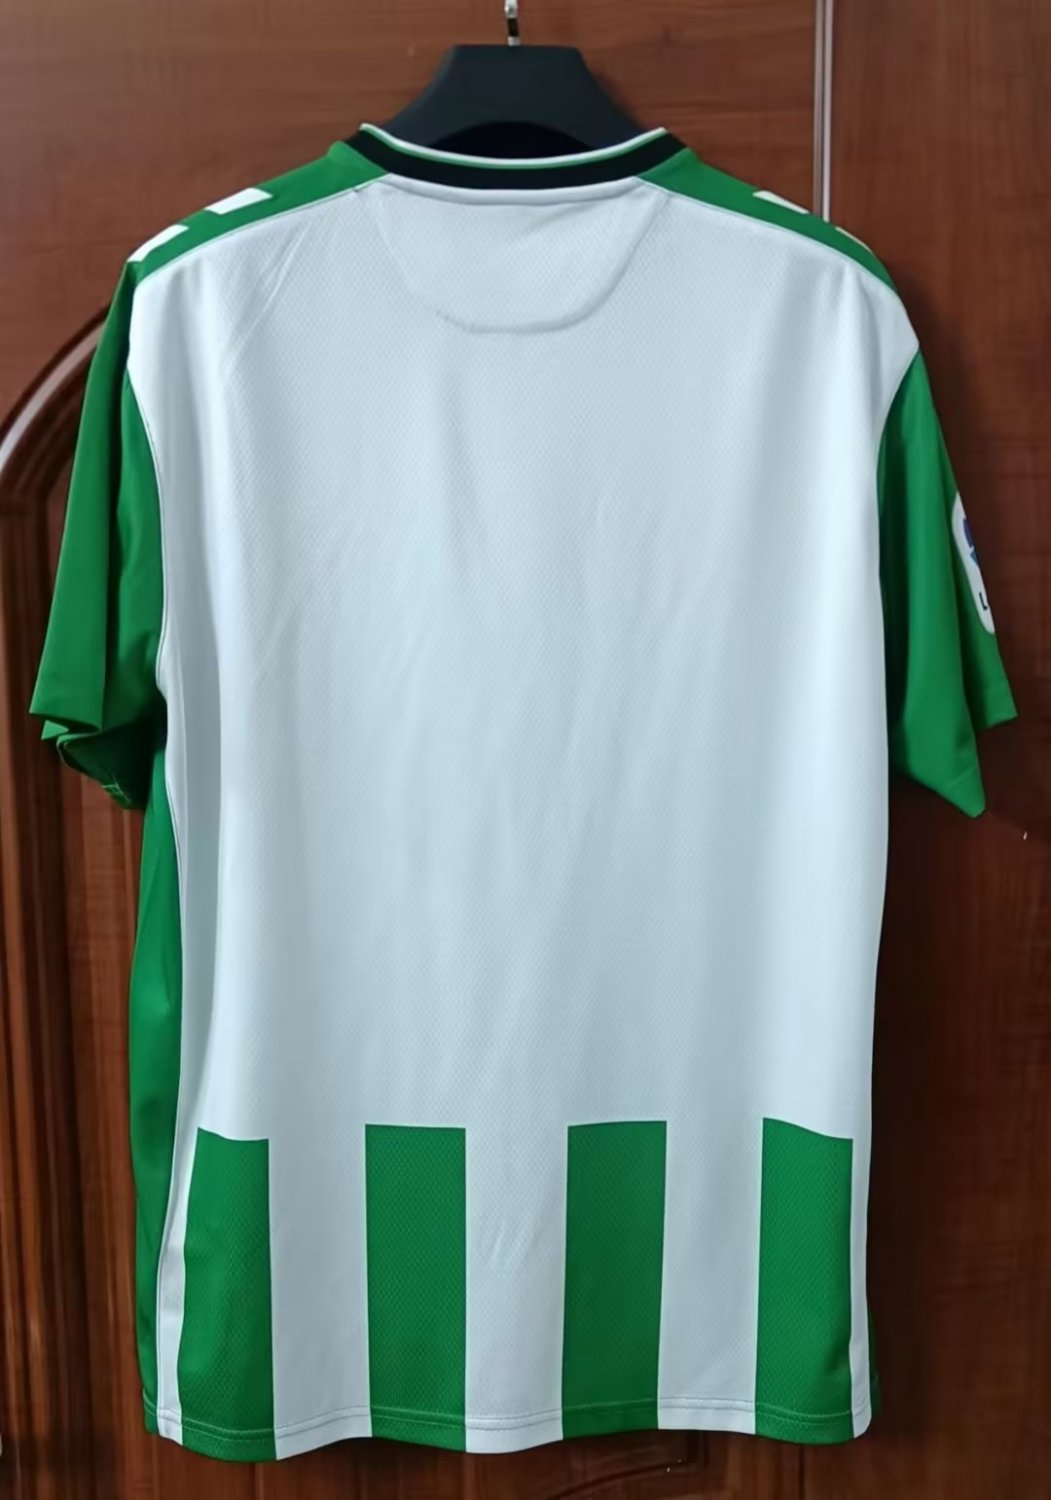 Real Betis Soccer Jersey Replica Home Mens 2022/23